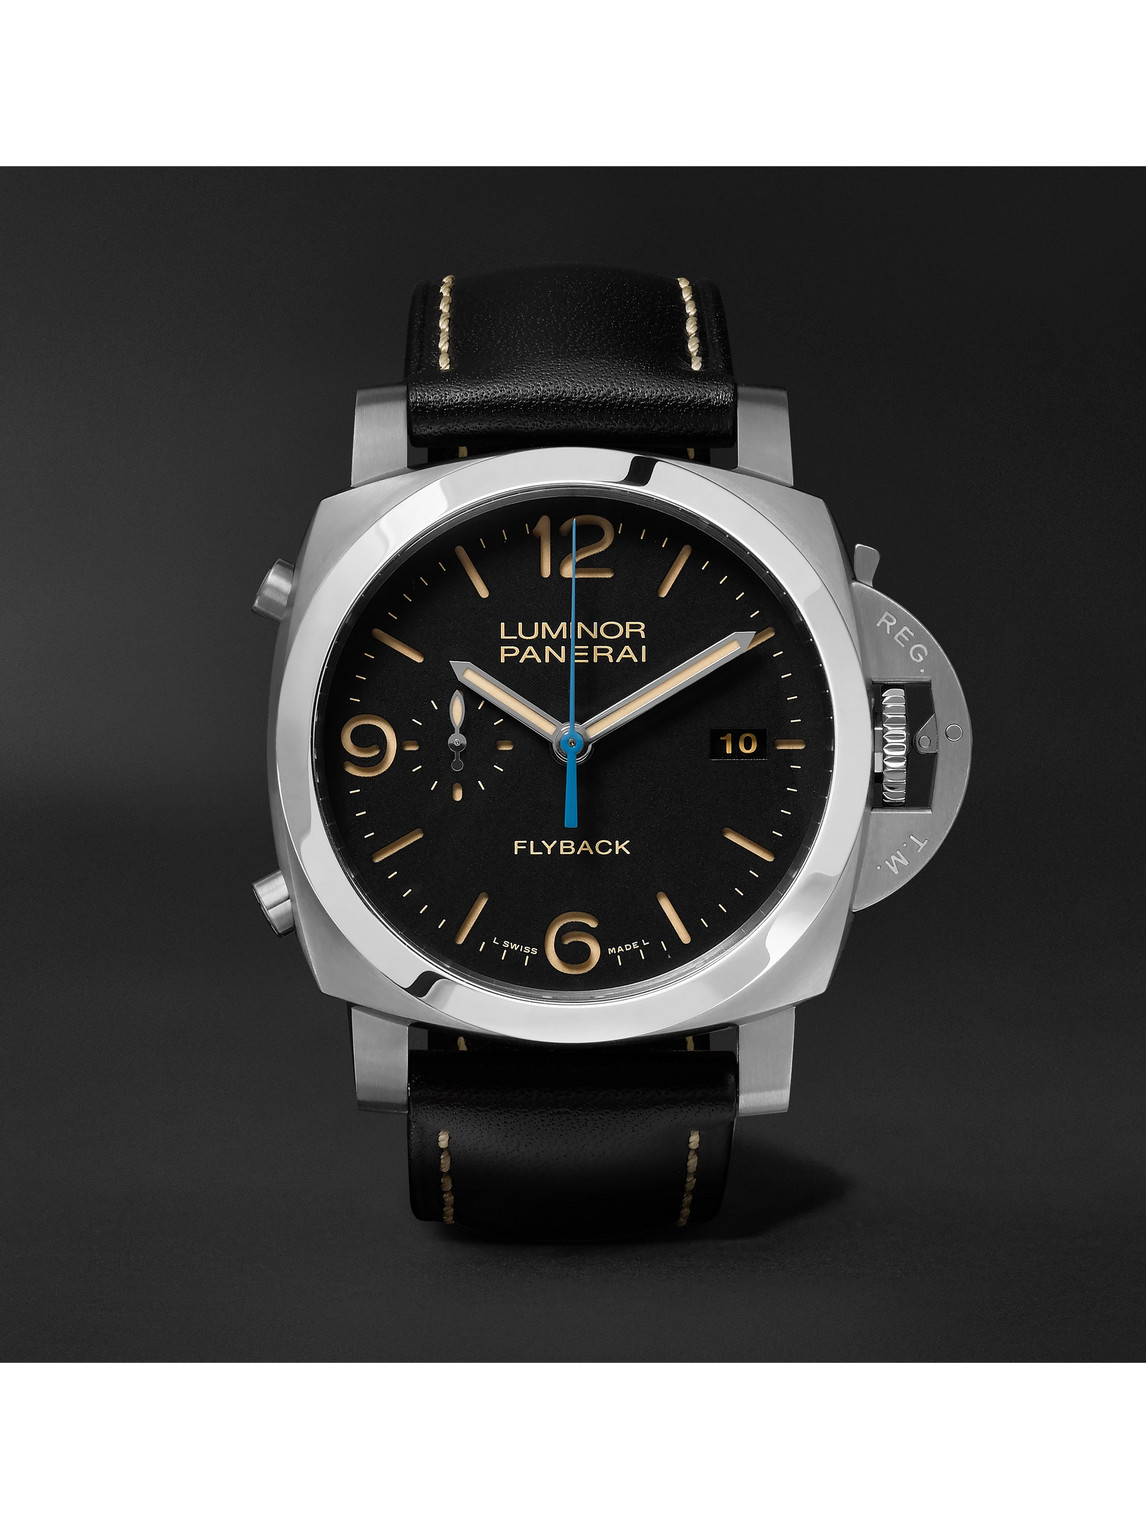 Panerai Luminor Chrono Automatic Flyback Chronograph 44mm Stainless Steel And Leather Watch, Ref. No. Pam005 In Black